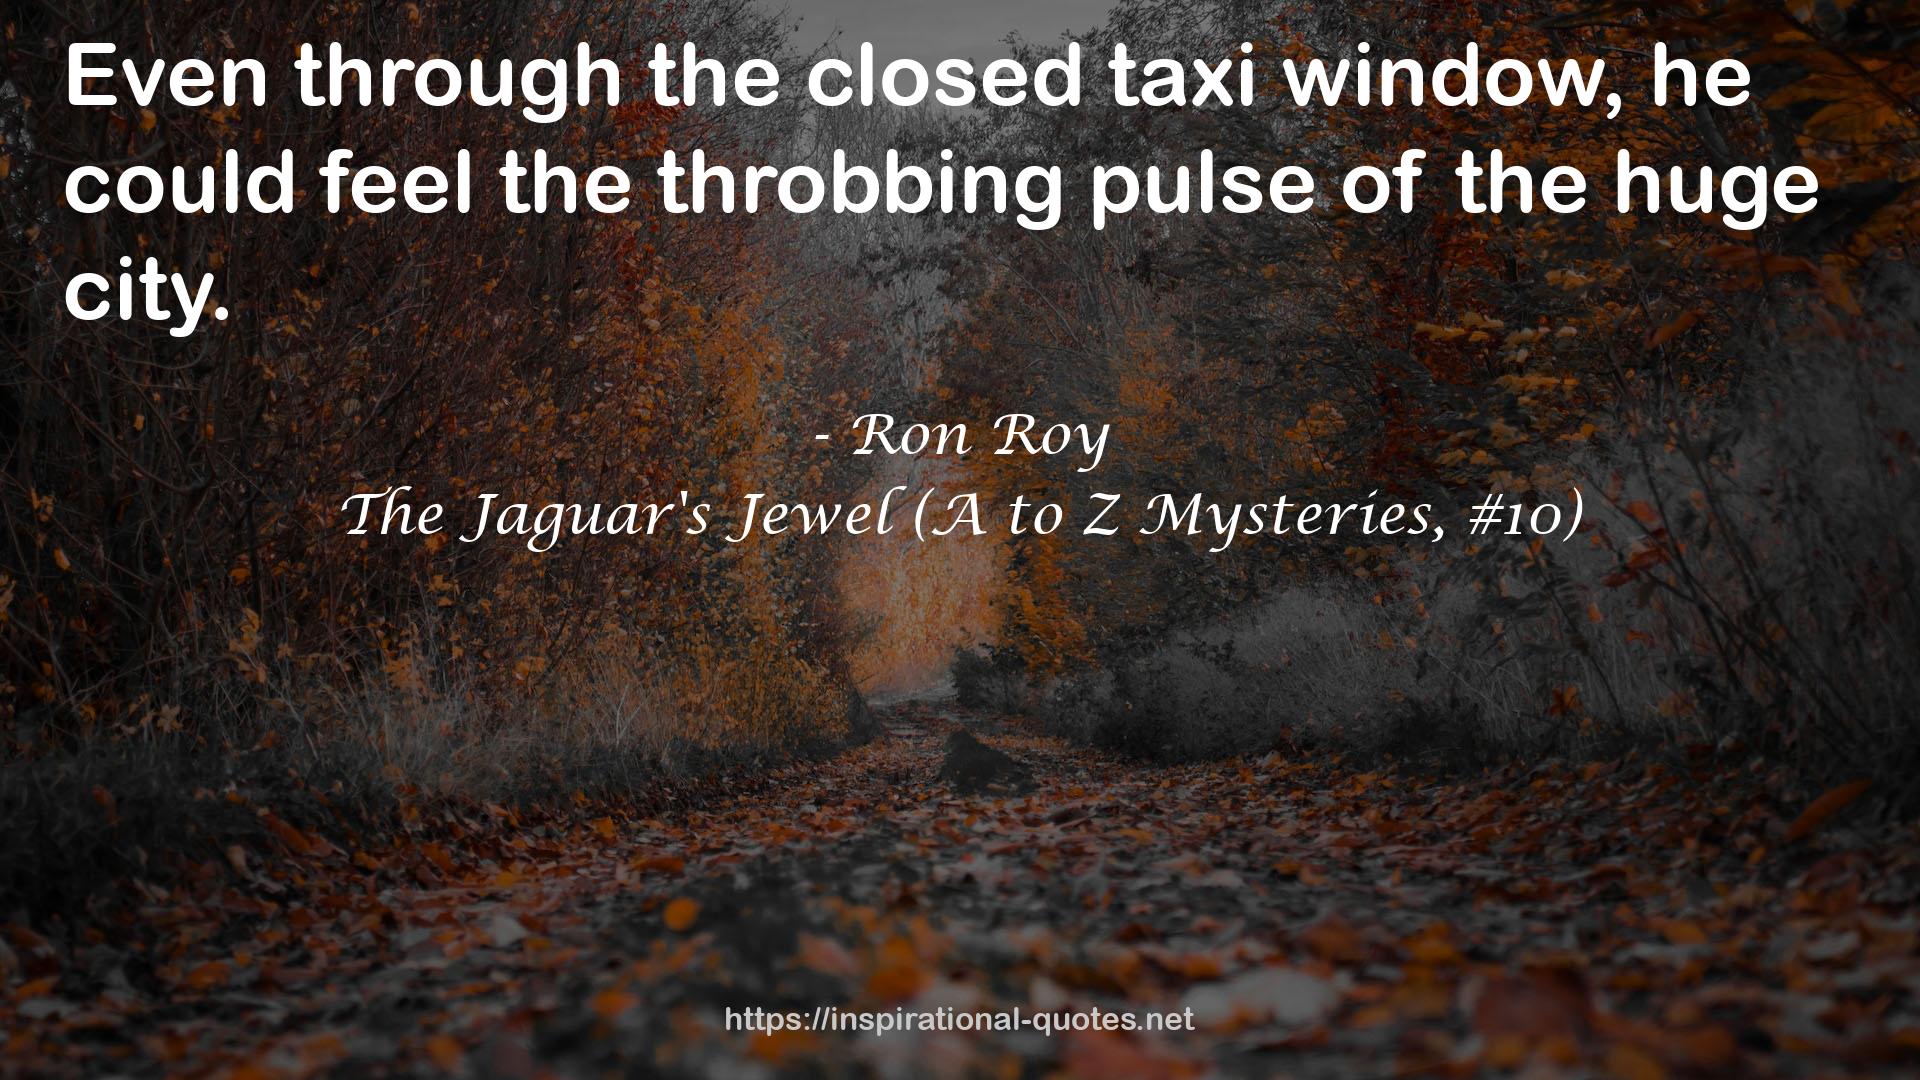 The Jaguar's Jewel (A to Z Mysteries, #10) QUOTES